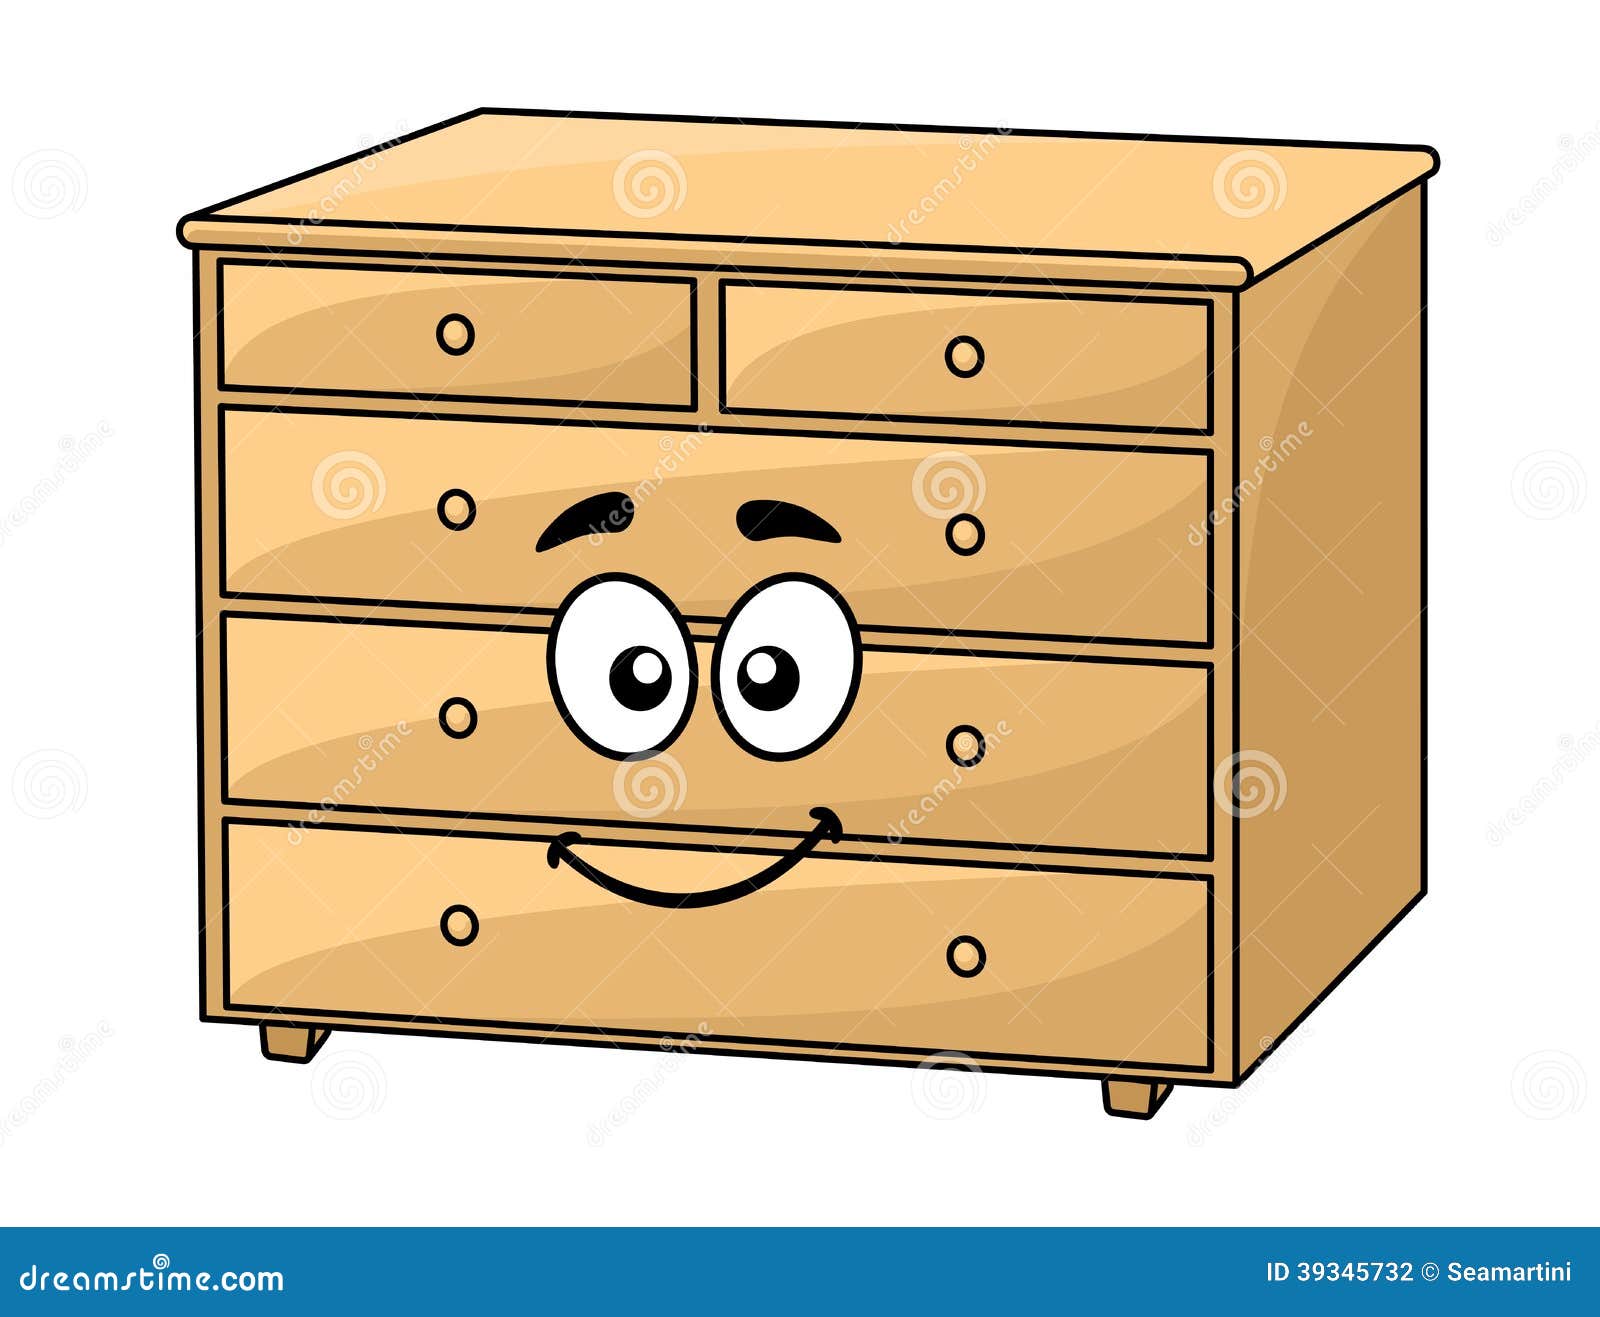 Cartoon wooden chest of drawers with a happy smiling face for interior 